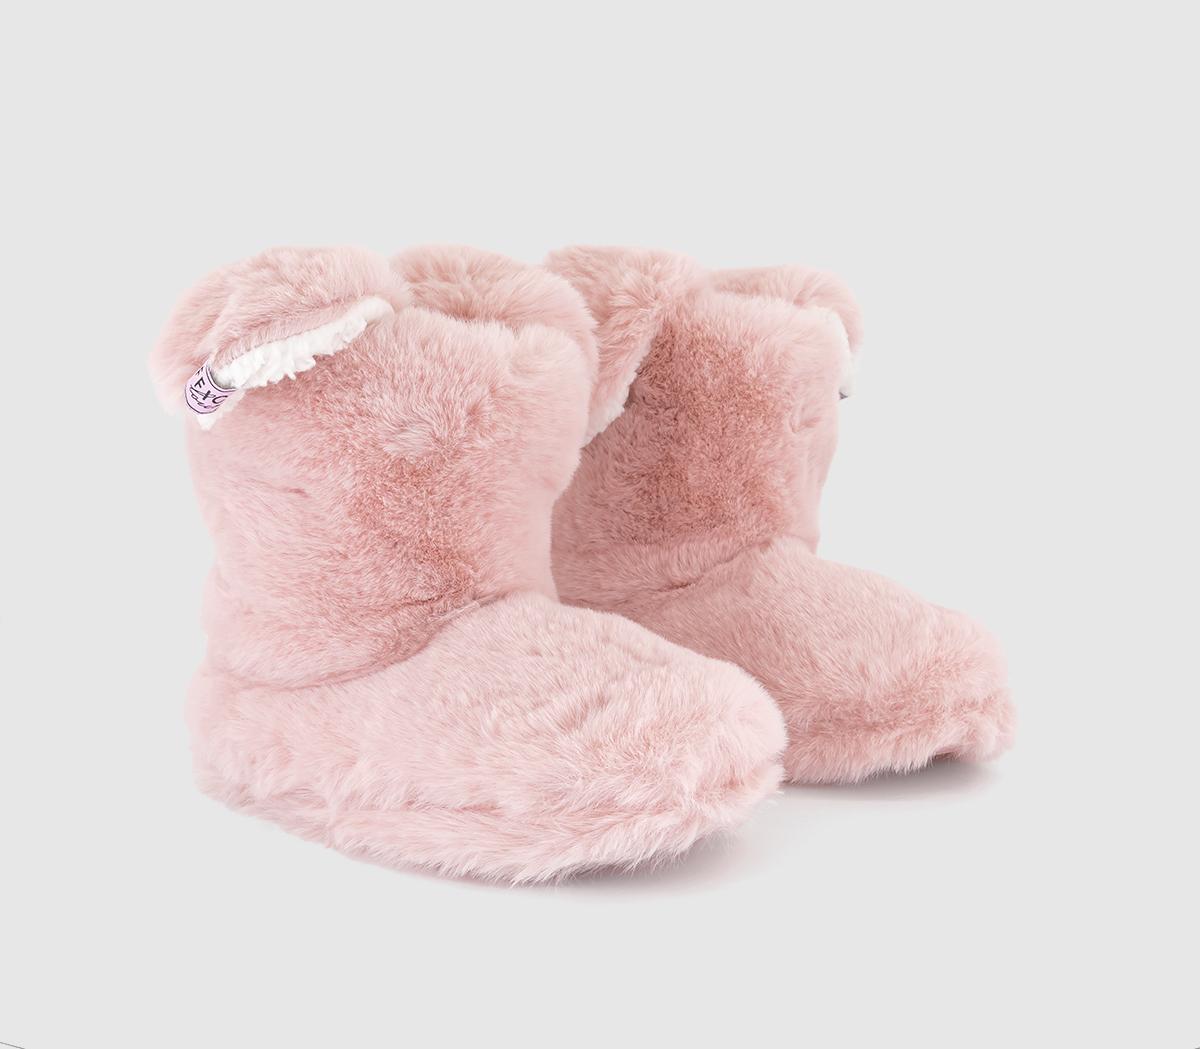 OFFICE Lounge Ruby Bunny Slipper Boots New Pink - Women's Slippers